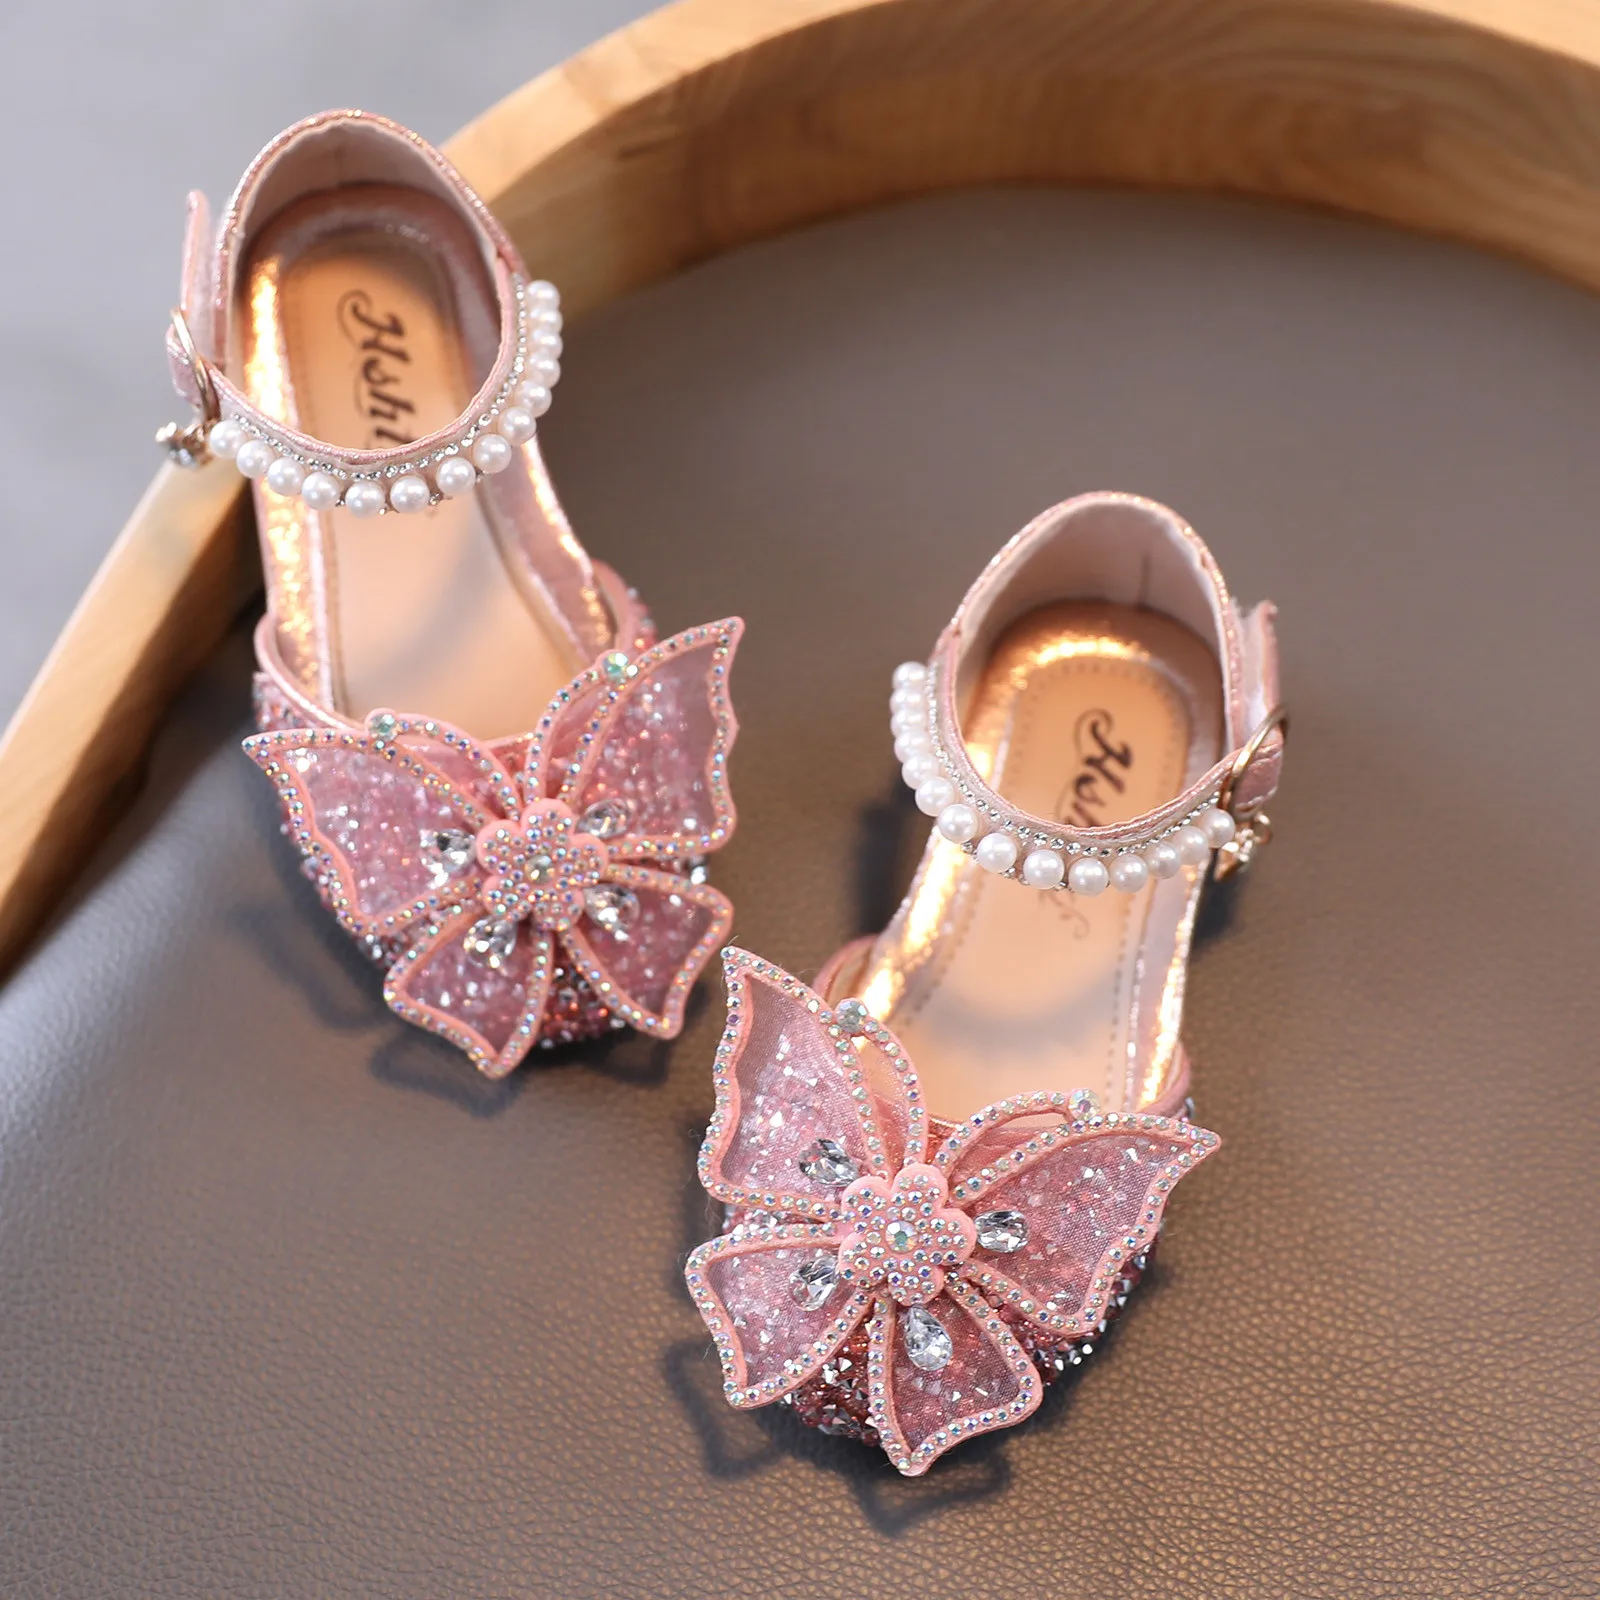 child shoes girl 1-11 Years Teen Girls Sequin Shoes Lace Bow Kids Girls Cute Pearl Princess Dance Single Casual Shoe Children Party Wedding Shoes girls shoes